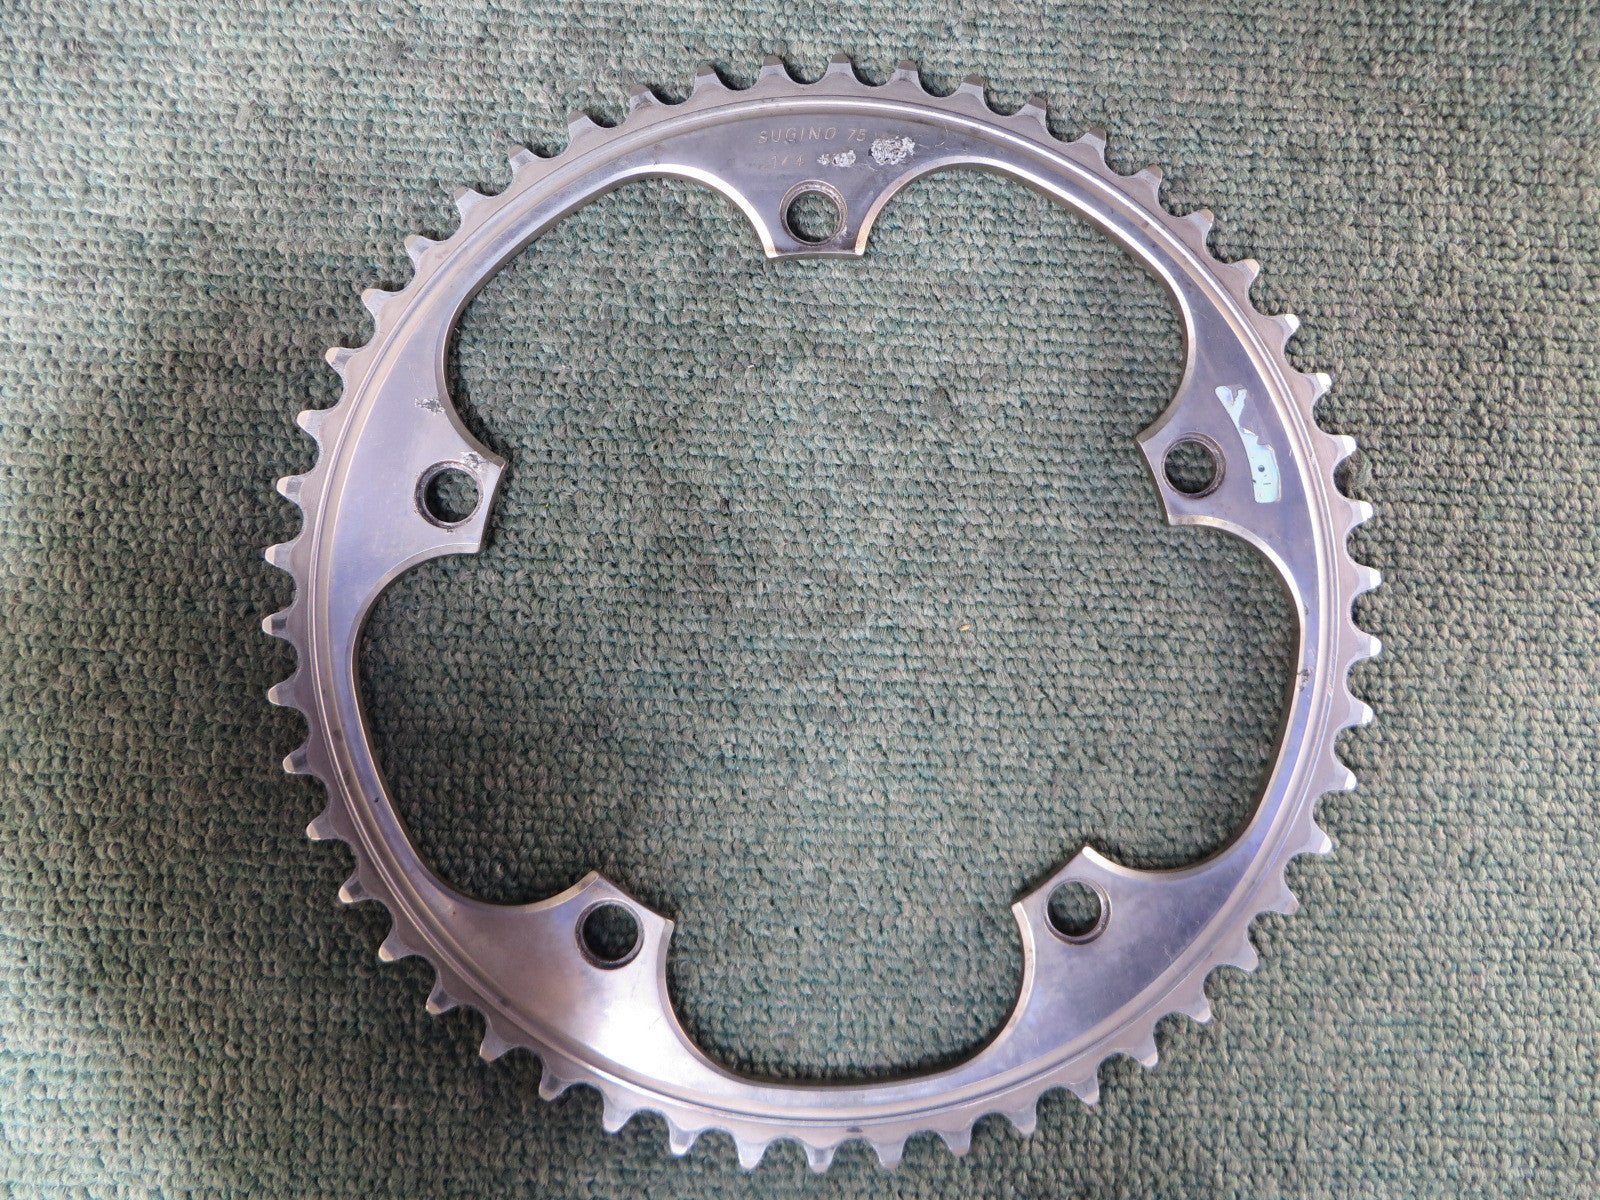 Sugino S-cubic Mirror Finish 144BCD NJS Chainring 50T (15041746)